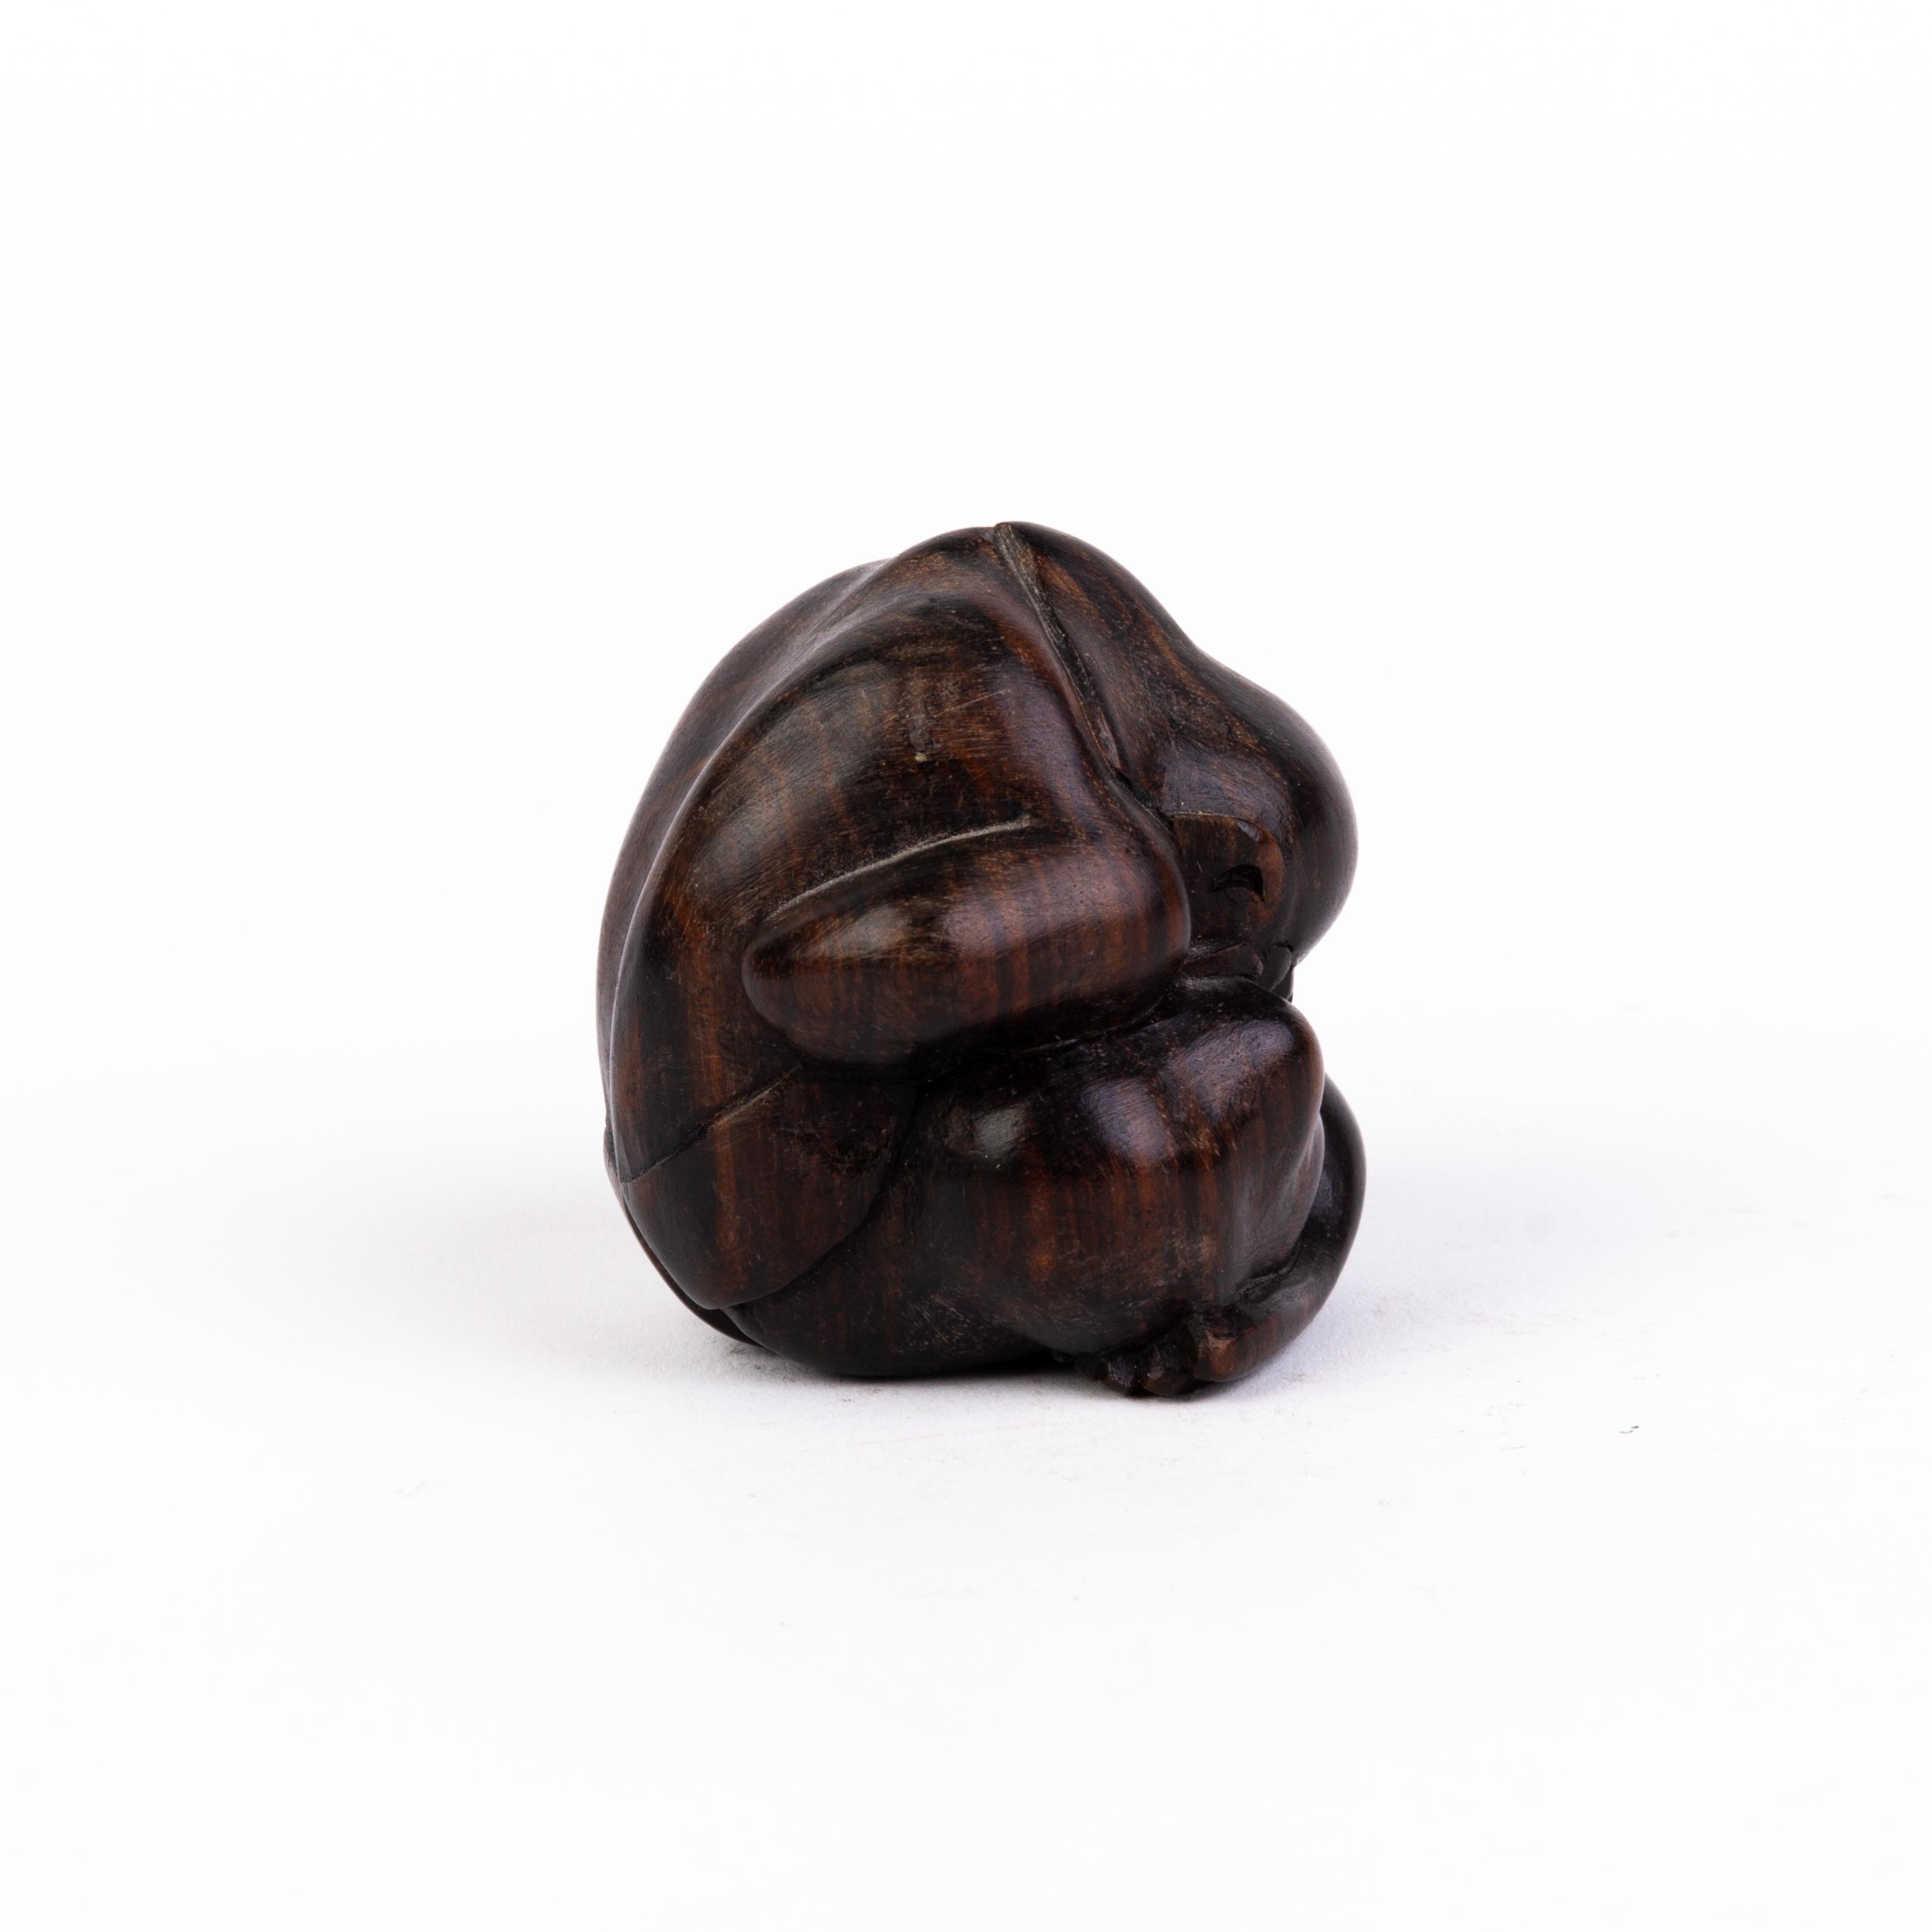 Japanese Carved Boxwood Monkey Netsuke Inro Ojime 
Monkey with his face buried in his lap
Good condition overall. 
From a private collection.
Free international shipping.